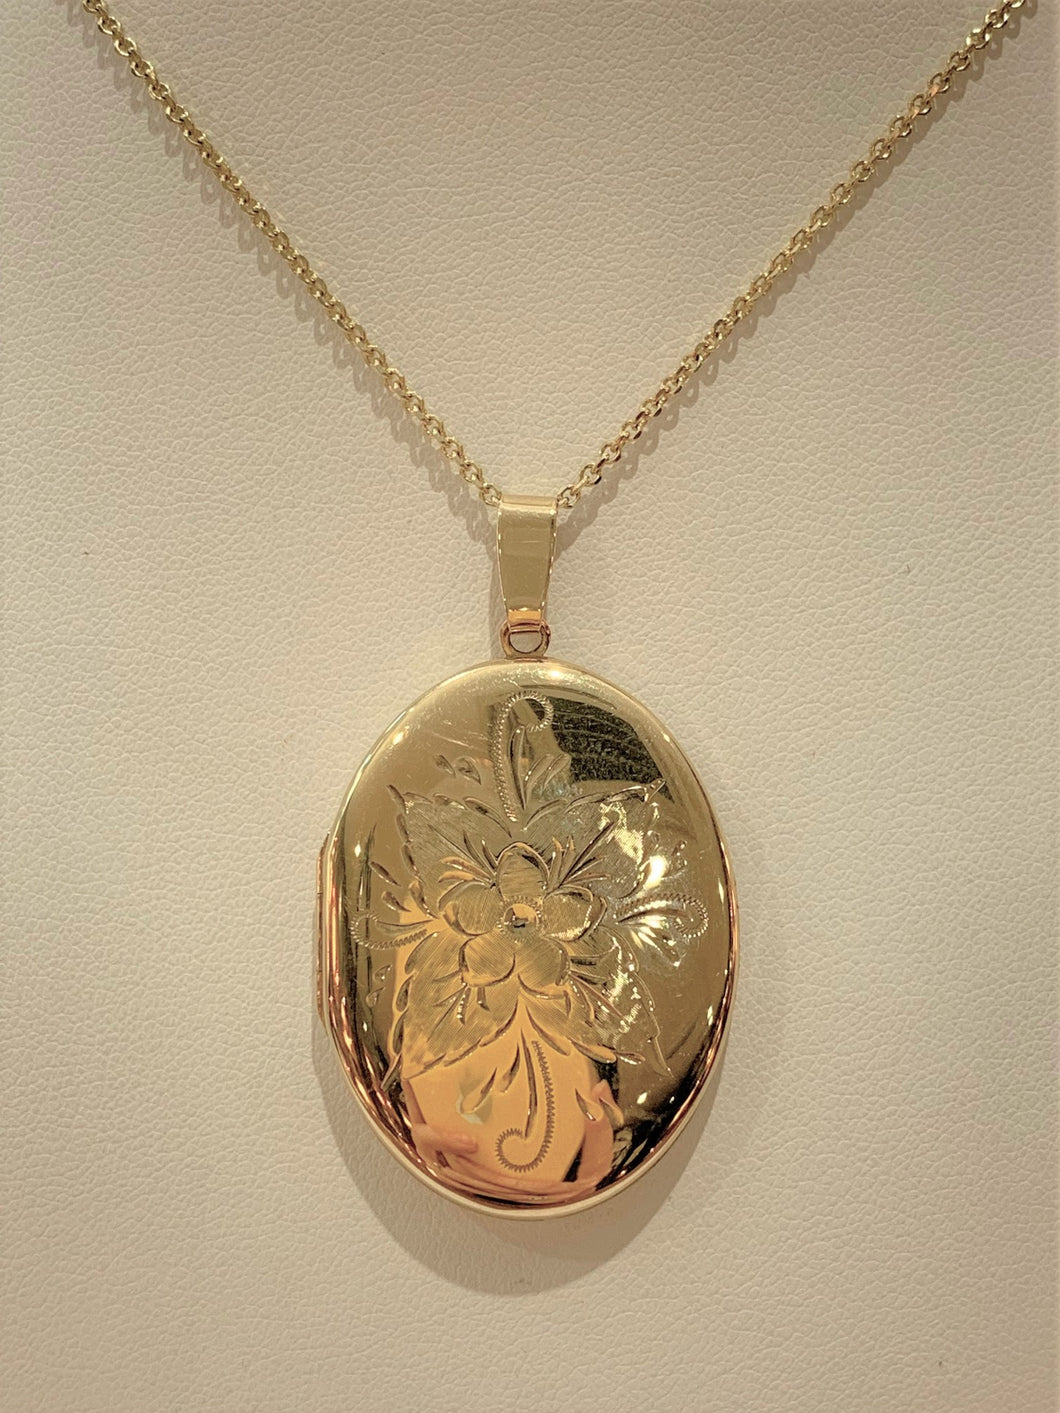 Secondhand 9ct Gold Oval Flower Engraved Locket Necklace